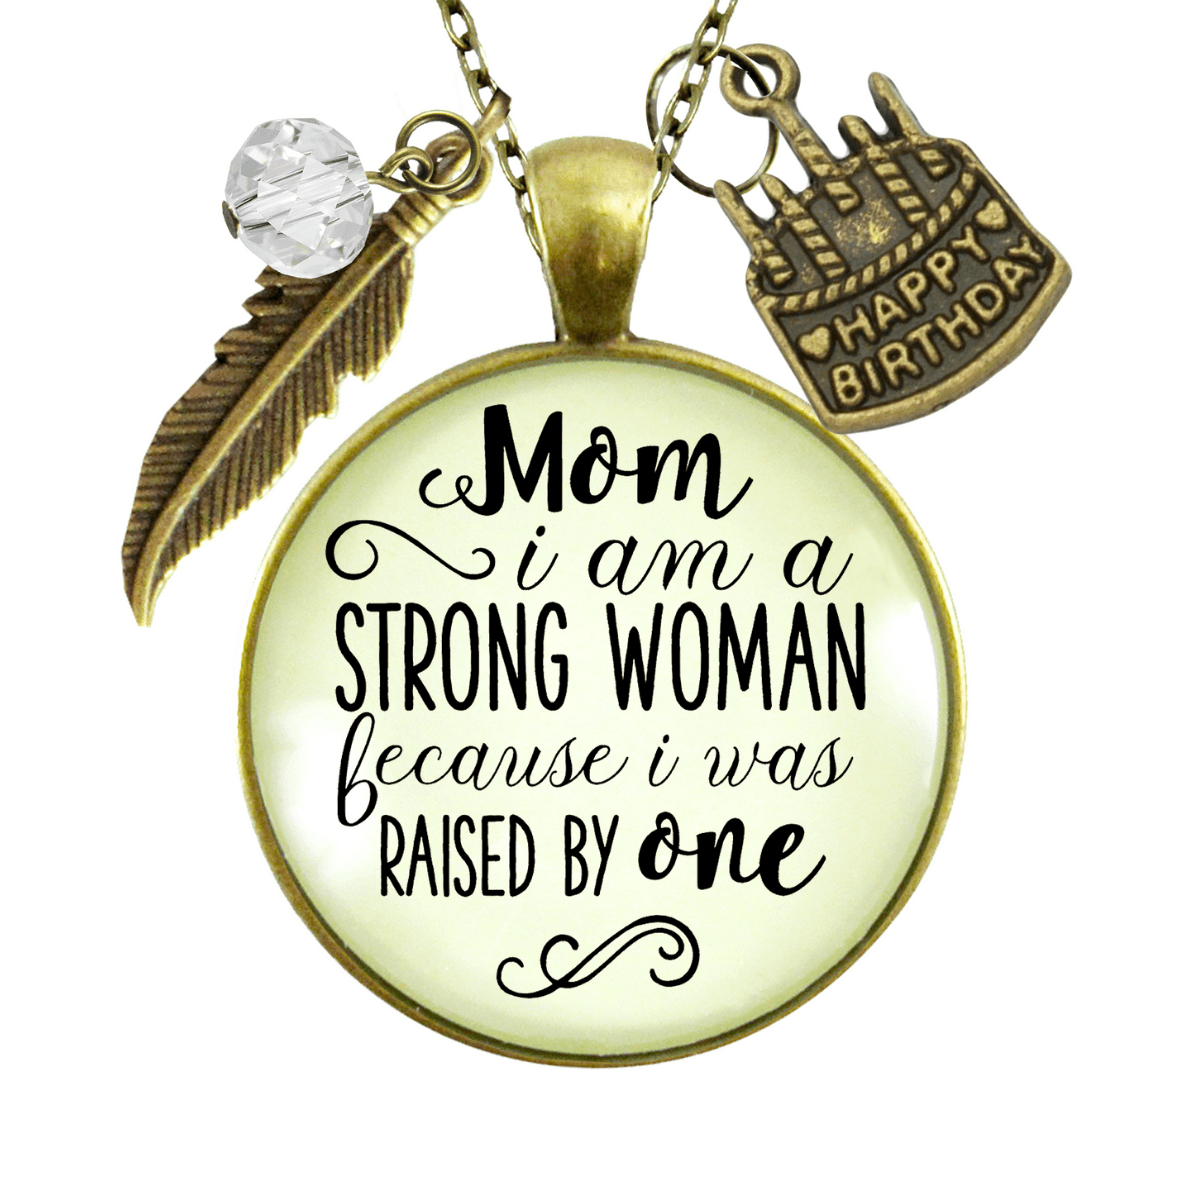 Gutsy Goodness Mom Birthday Gift Necklace I am a Strong Woman from Daughter Jewelry - Gutsy Goodness Handmade Jewelry;Mom Birthday Gift Necklace I Am A Strong Woman From Daughter Jewelry - Gutsy Goodness Handmade Jewelry Gifts